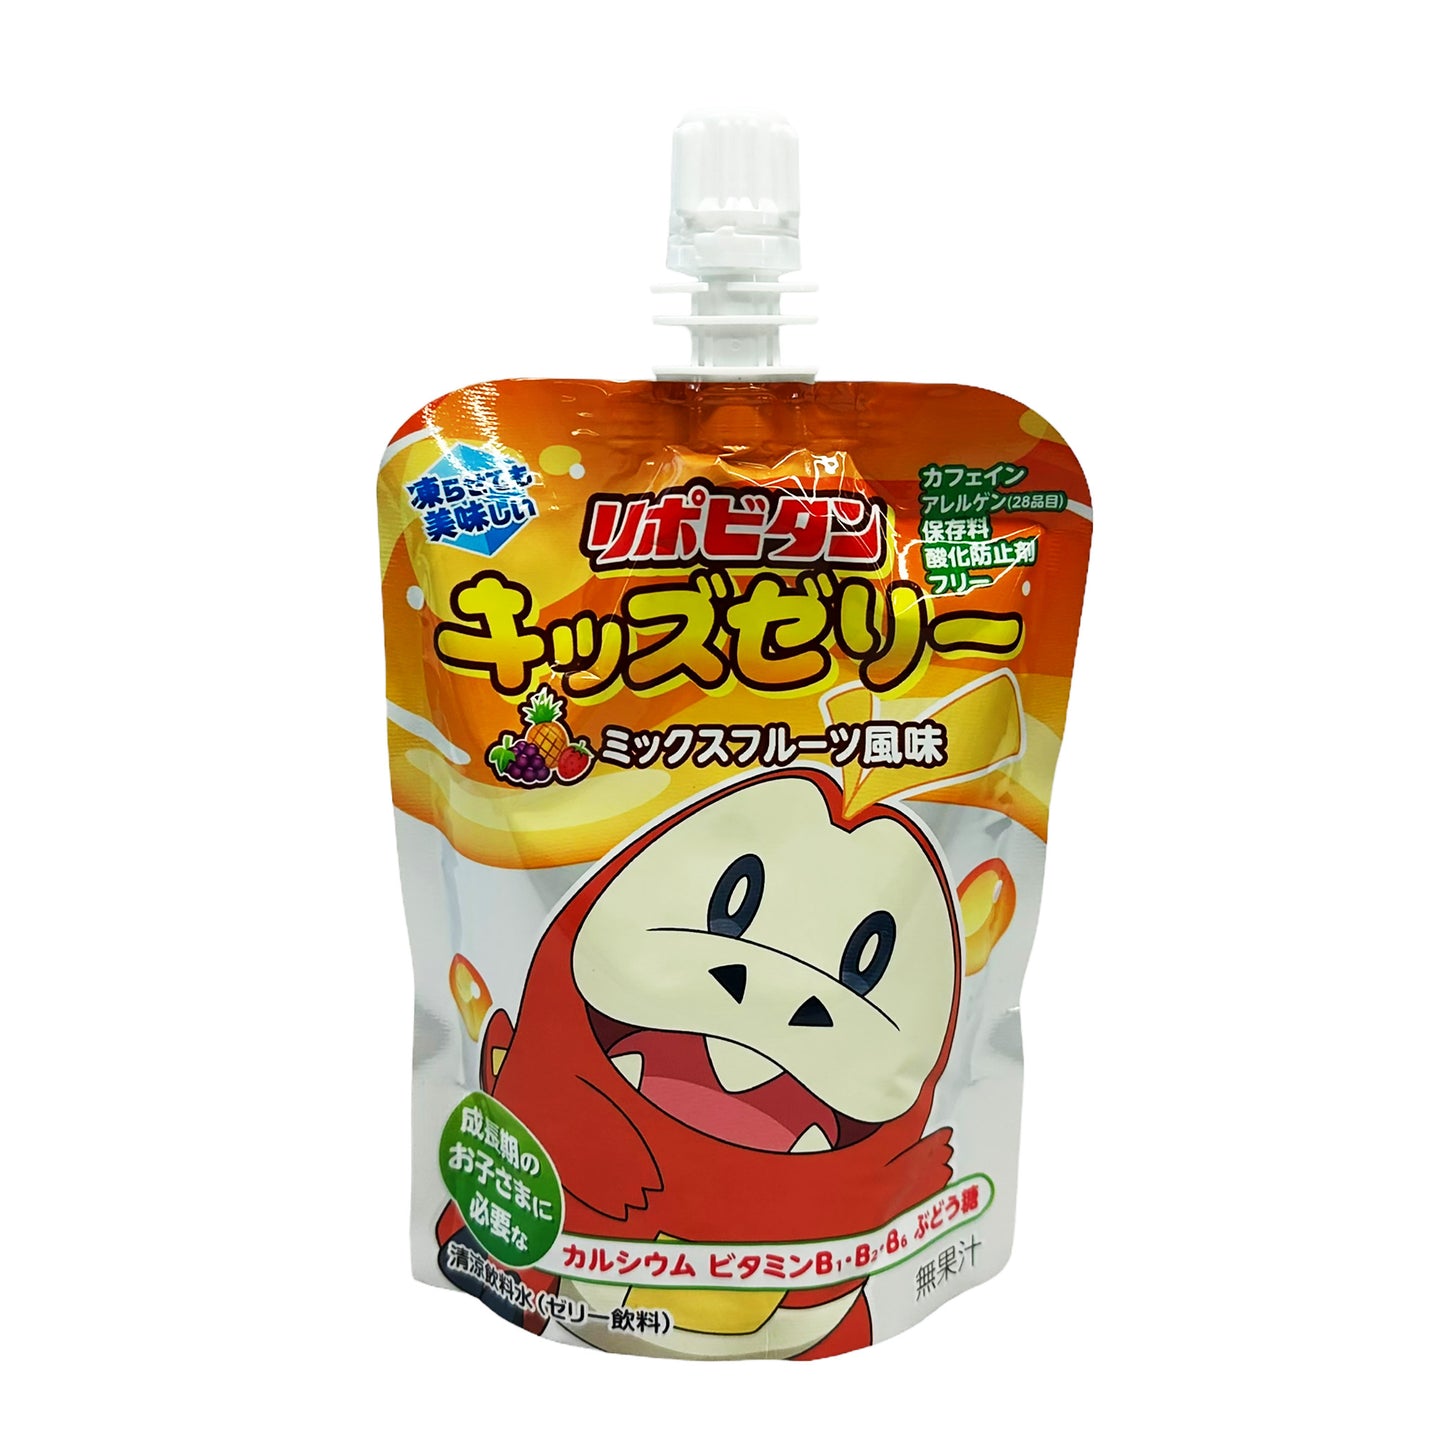 Front graphic image 2 of Taisho Pokemon Jelly Drink - Mixed Fruits 4.4oz (125g)